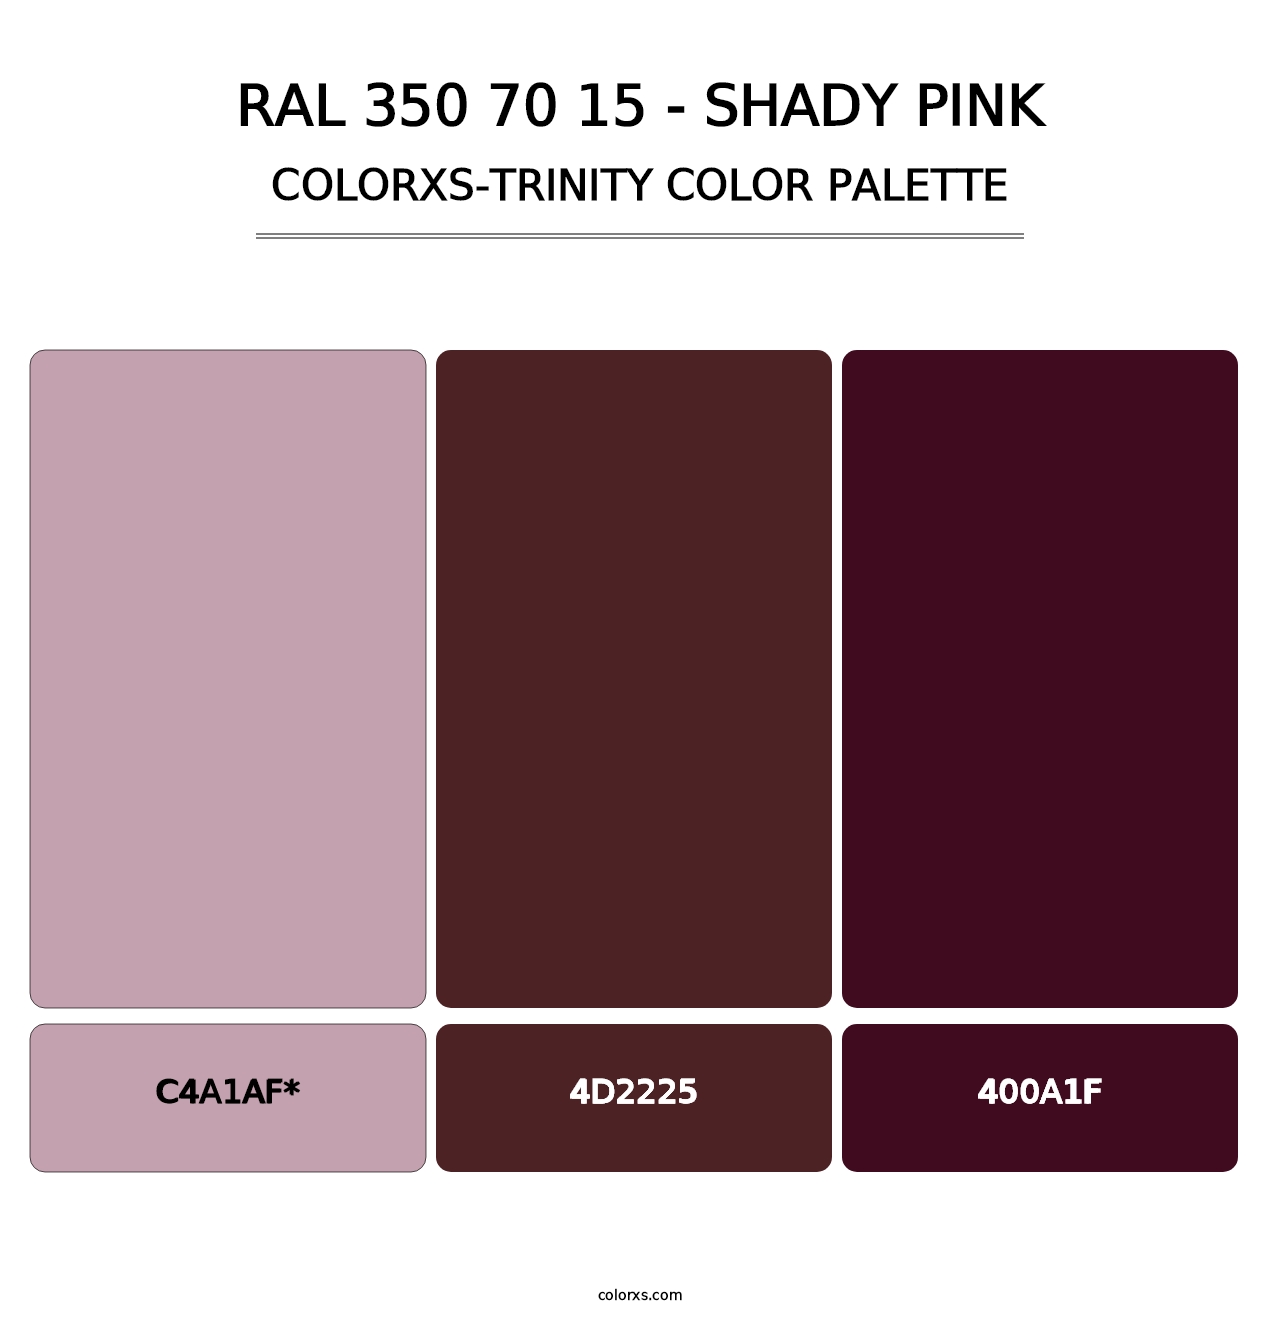 RAL 350 70 15 - Shady Pink - Colorxs Trinity Palette